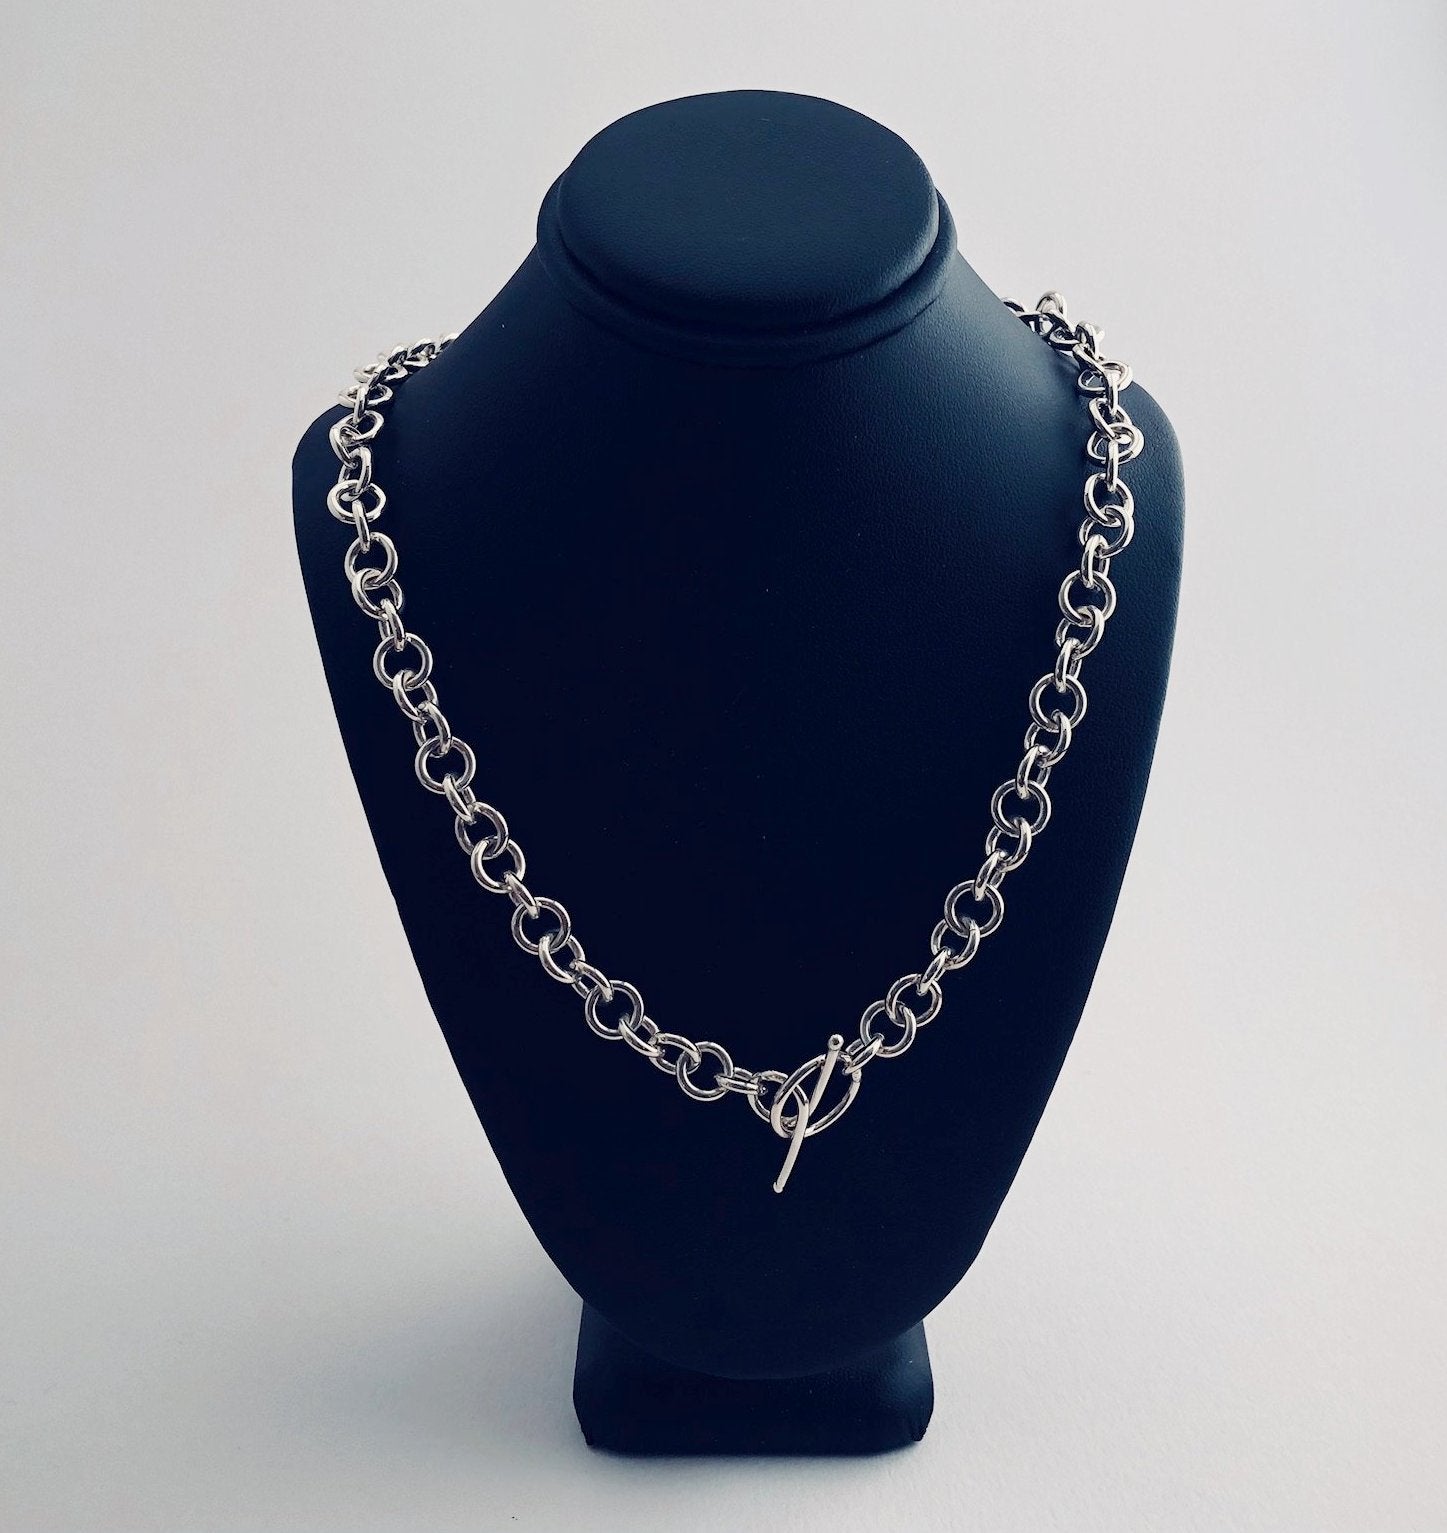 sterling silver necklace chain length exchange — Beaudoin Glass